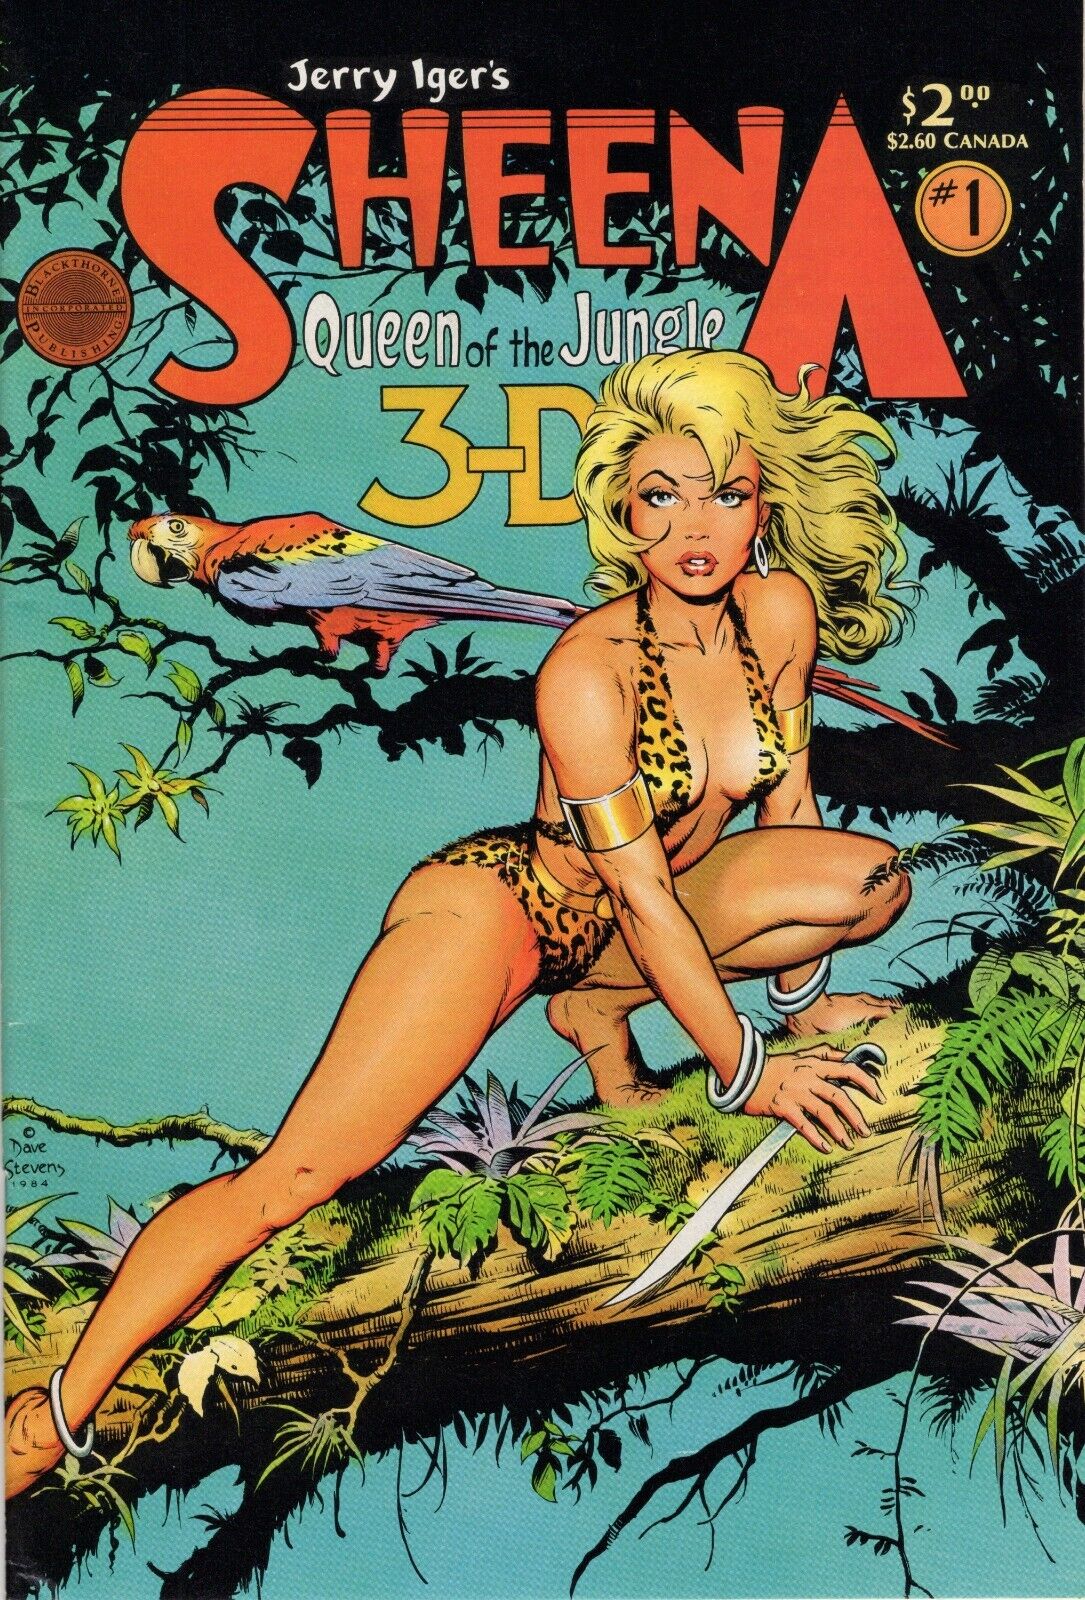 Sheena Queen of the Jungle #1 3-D Special (Blackthorne, 1985) Dave Stevens Cover